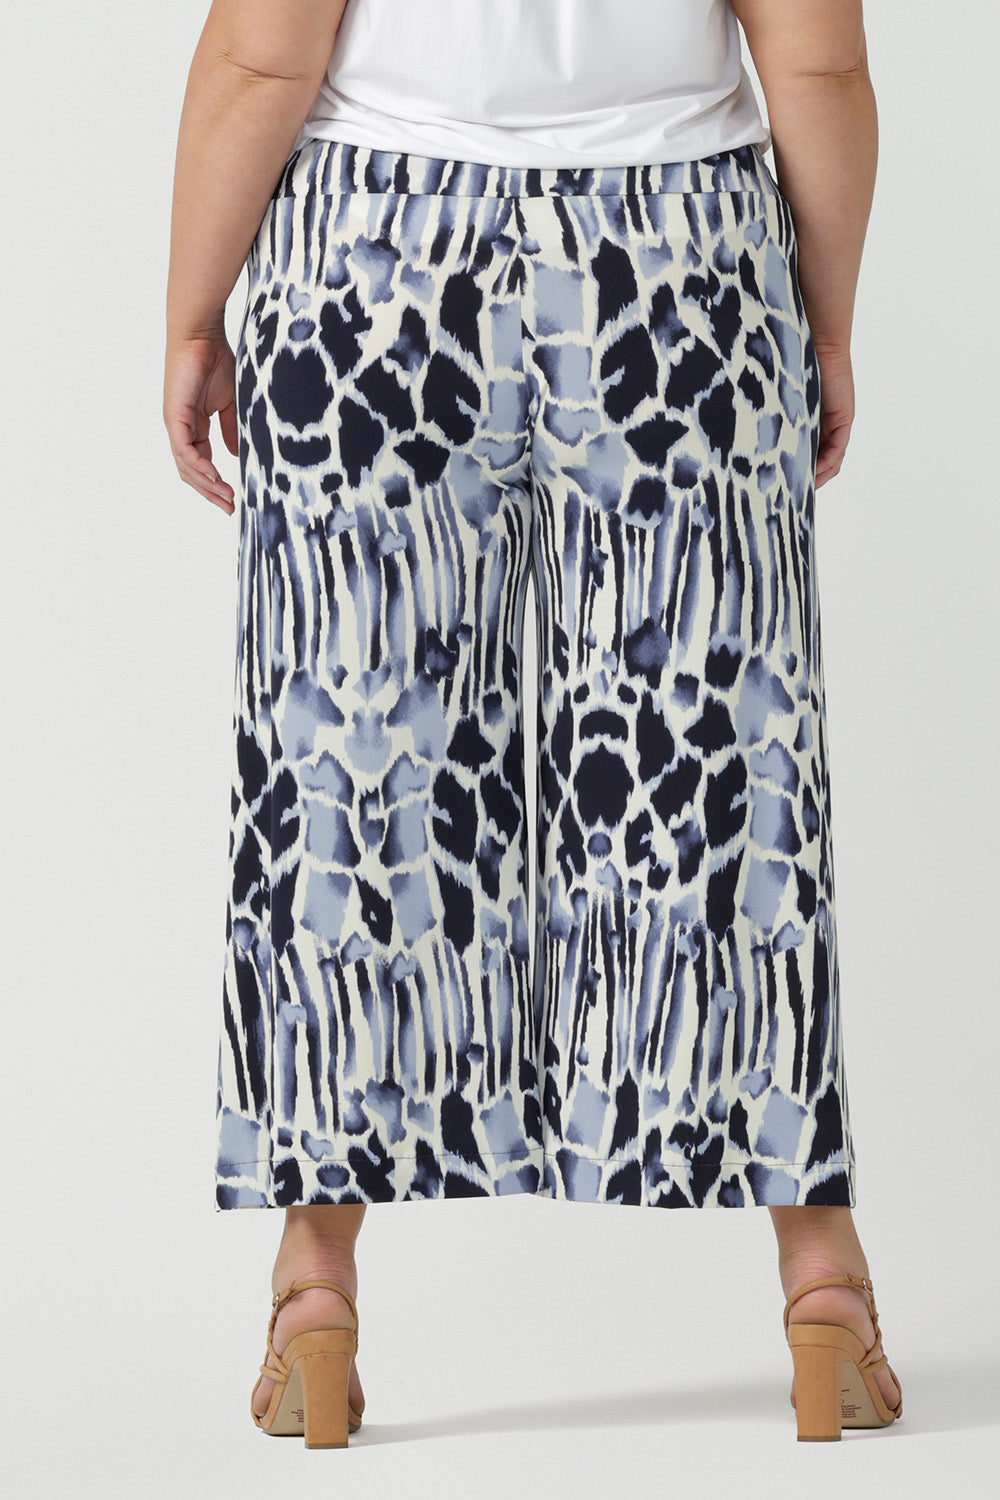 Back view of cropped, wide leg culotte pants in blue and white print are shown in a size as good plus size pants for curvy women. Great summer pants, these culottes have a pull-on waistband and side pockets. Easy care pants, they are comfortable as work wear pants or for casual wear. Made in Australia by Australian women's fashion label, Leina & Fleur